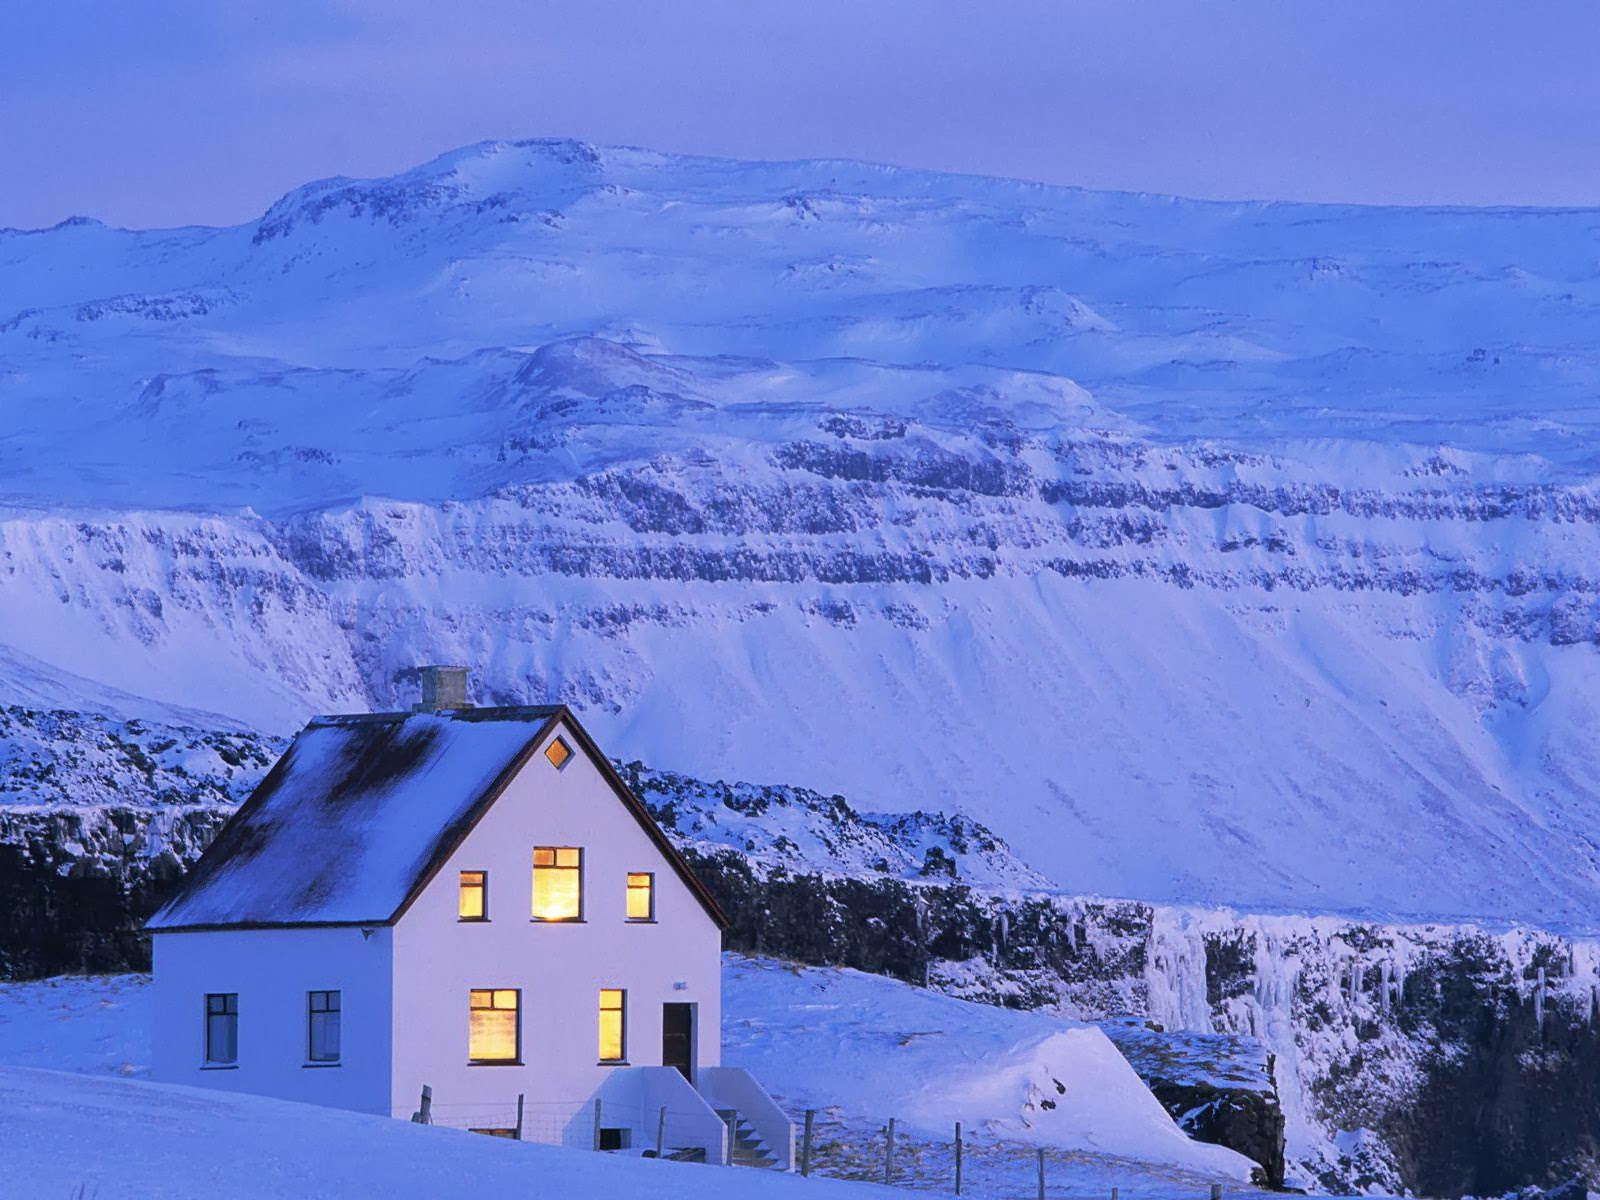 Travel in Iceland between Volcanoes, Glaciers and Northern Lights